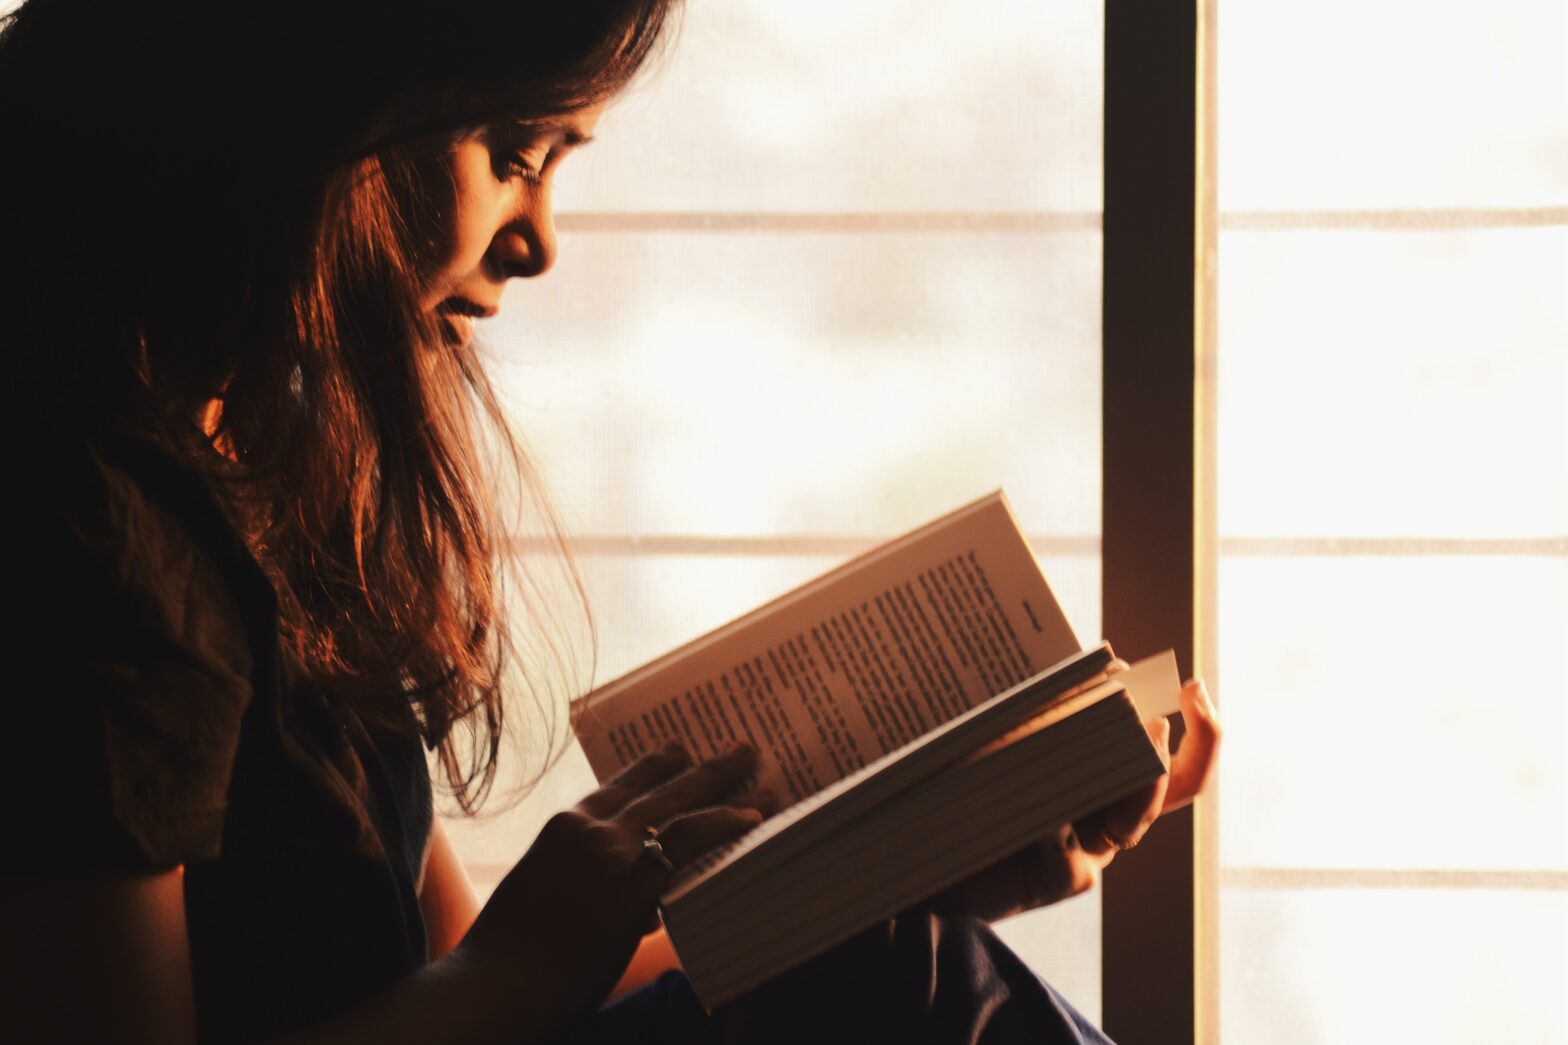 A girl reading a book beside the window.